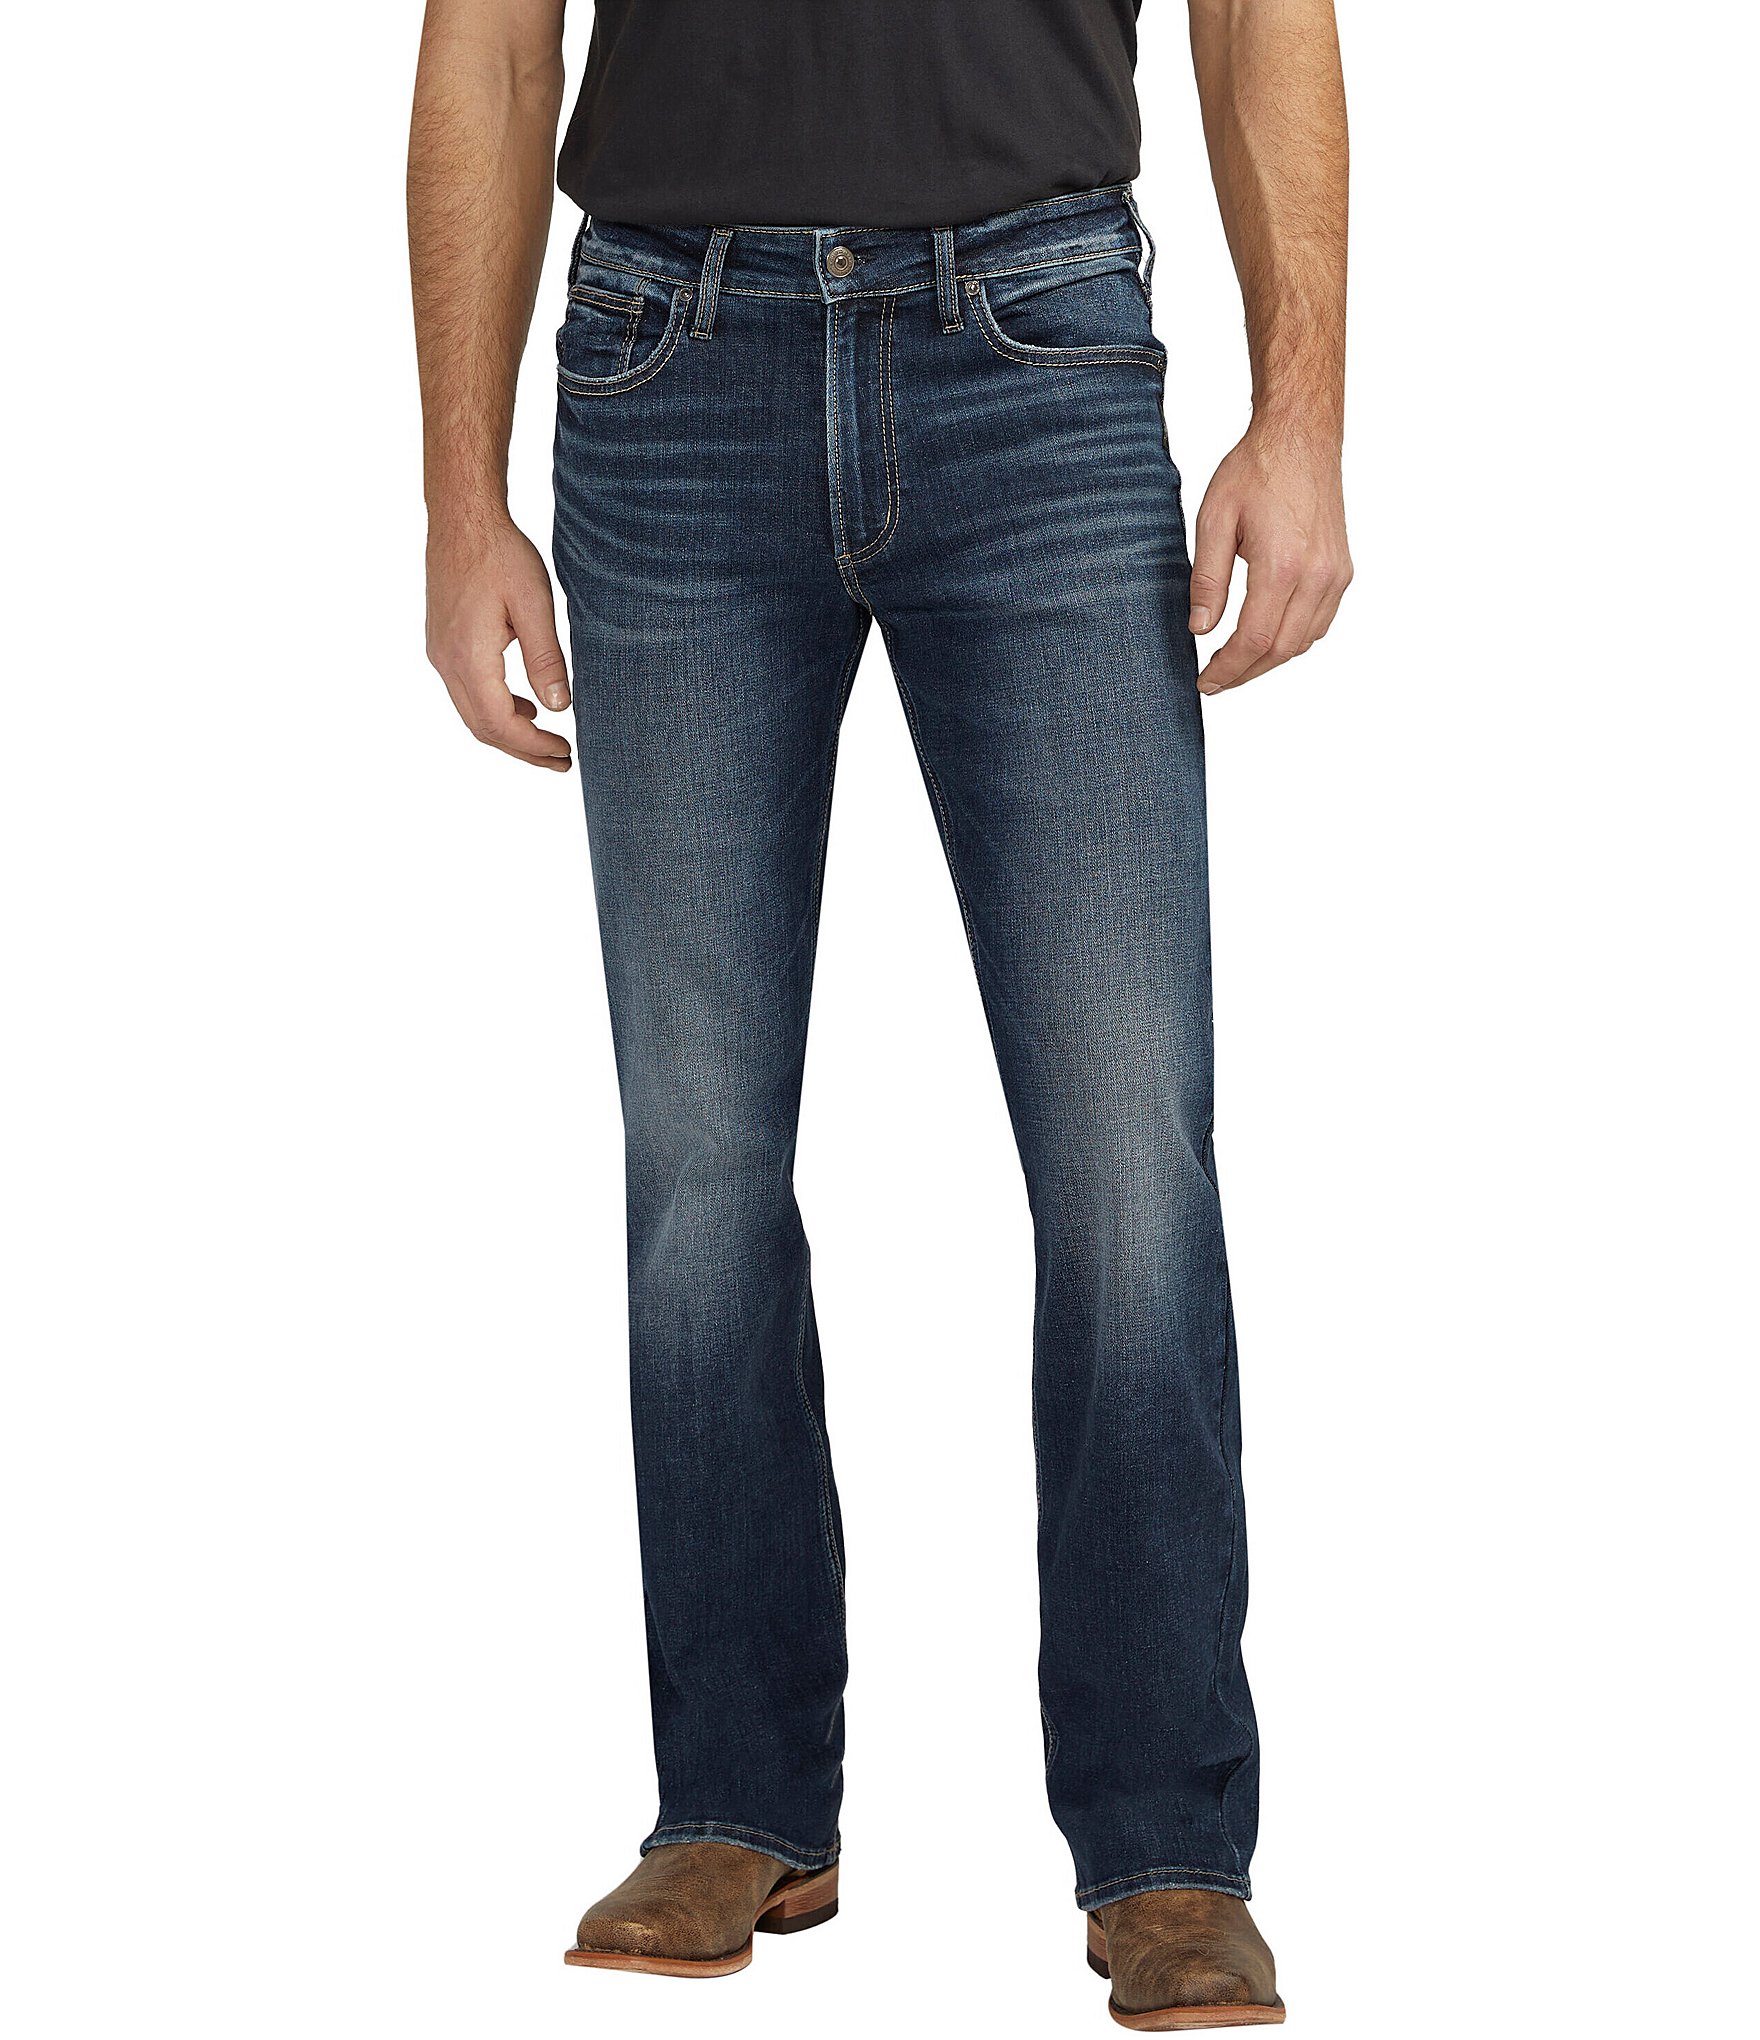 Silver Jeans Co. Zac Relaxed Fit Straight Leg Dusted Denim Jeans | Dillard's